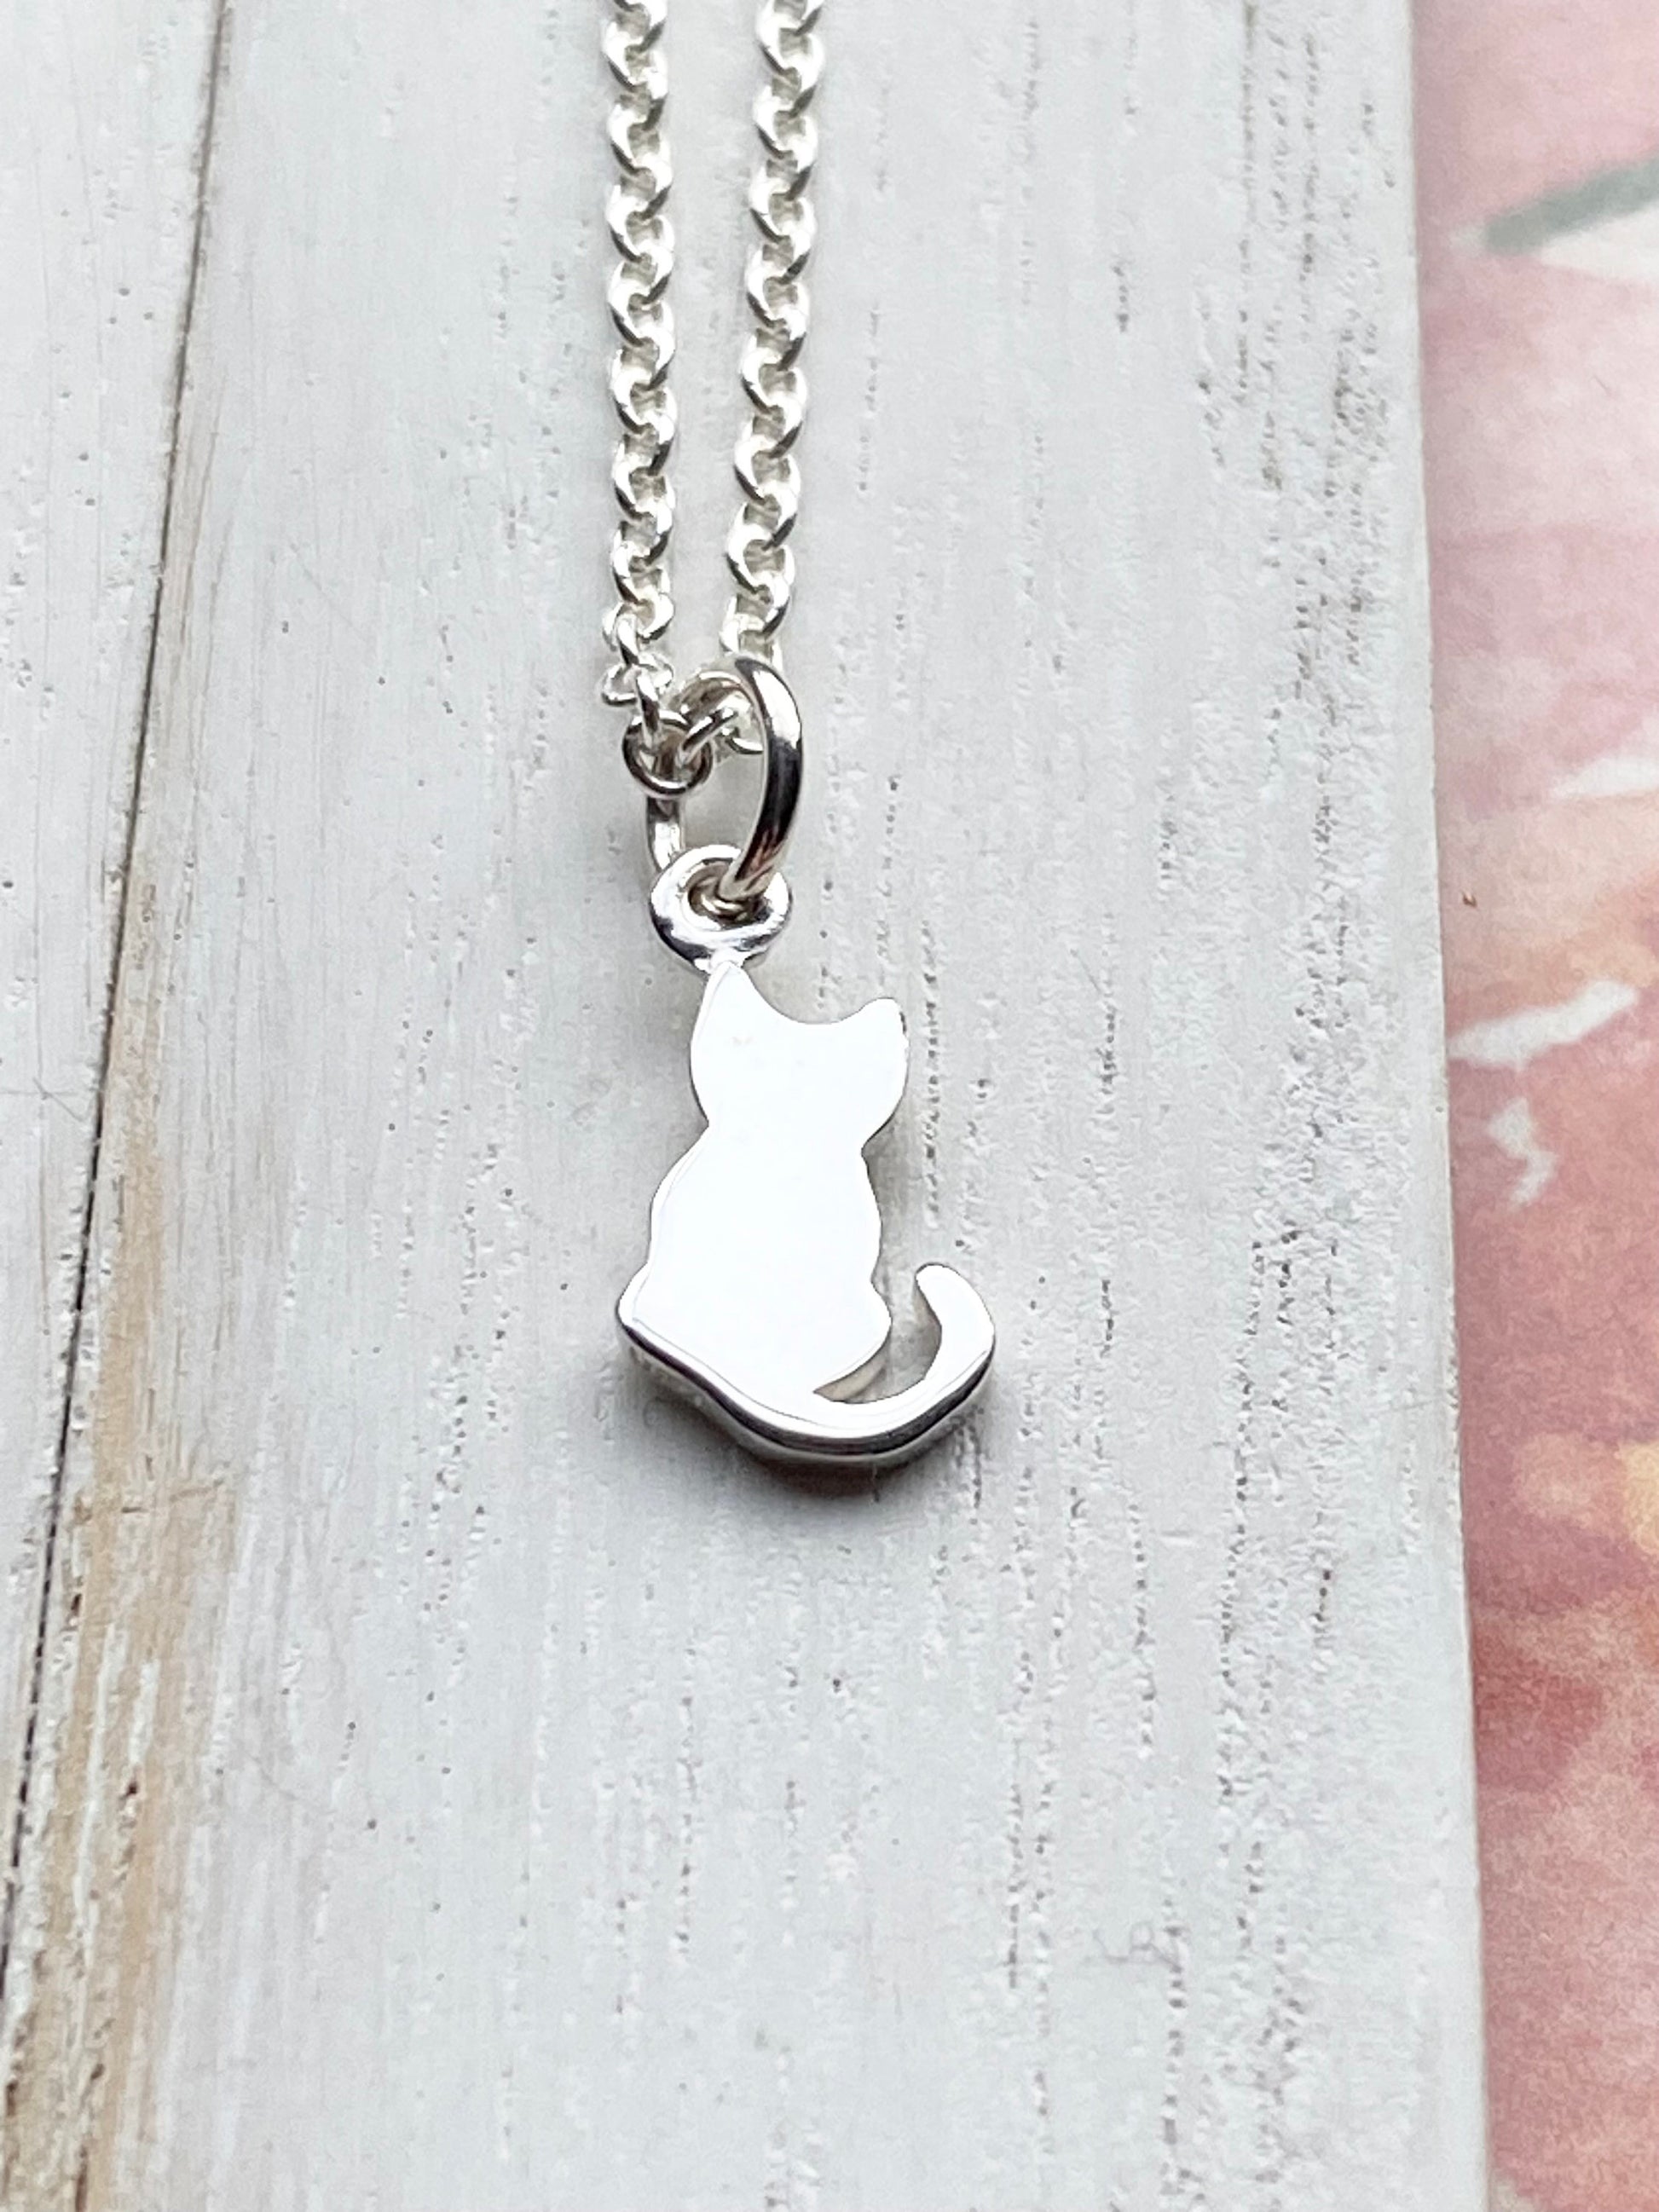 Tiny Cat Necklace Sterling Silver Kitty